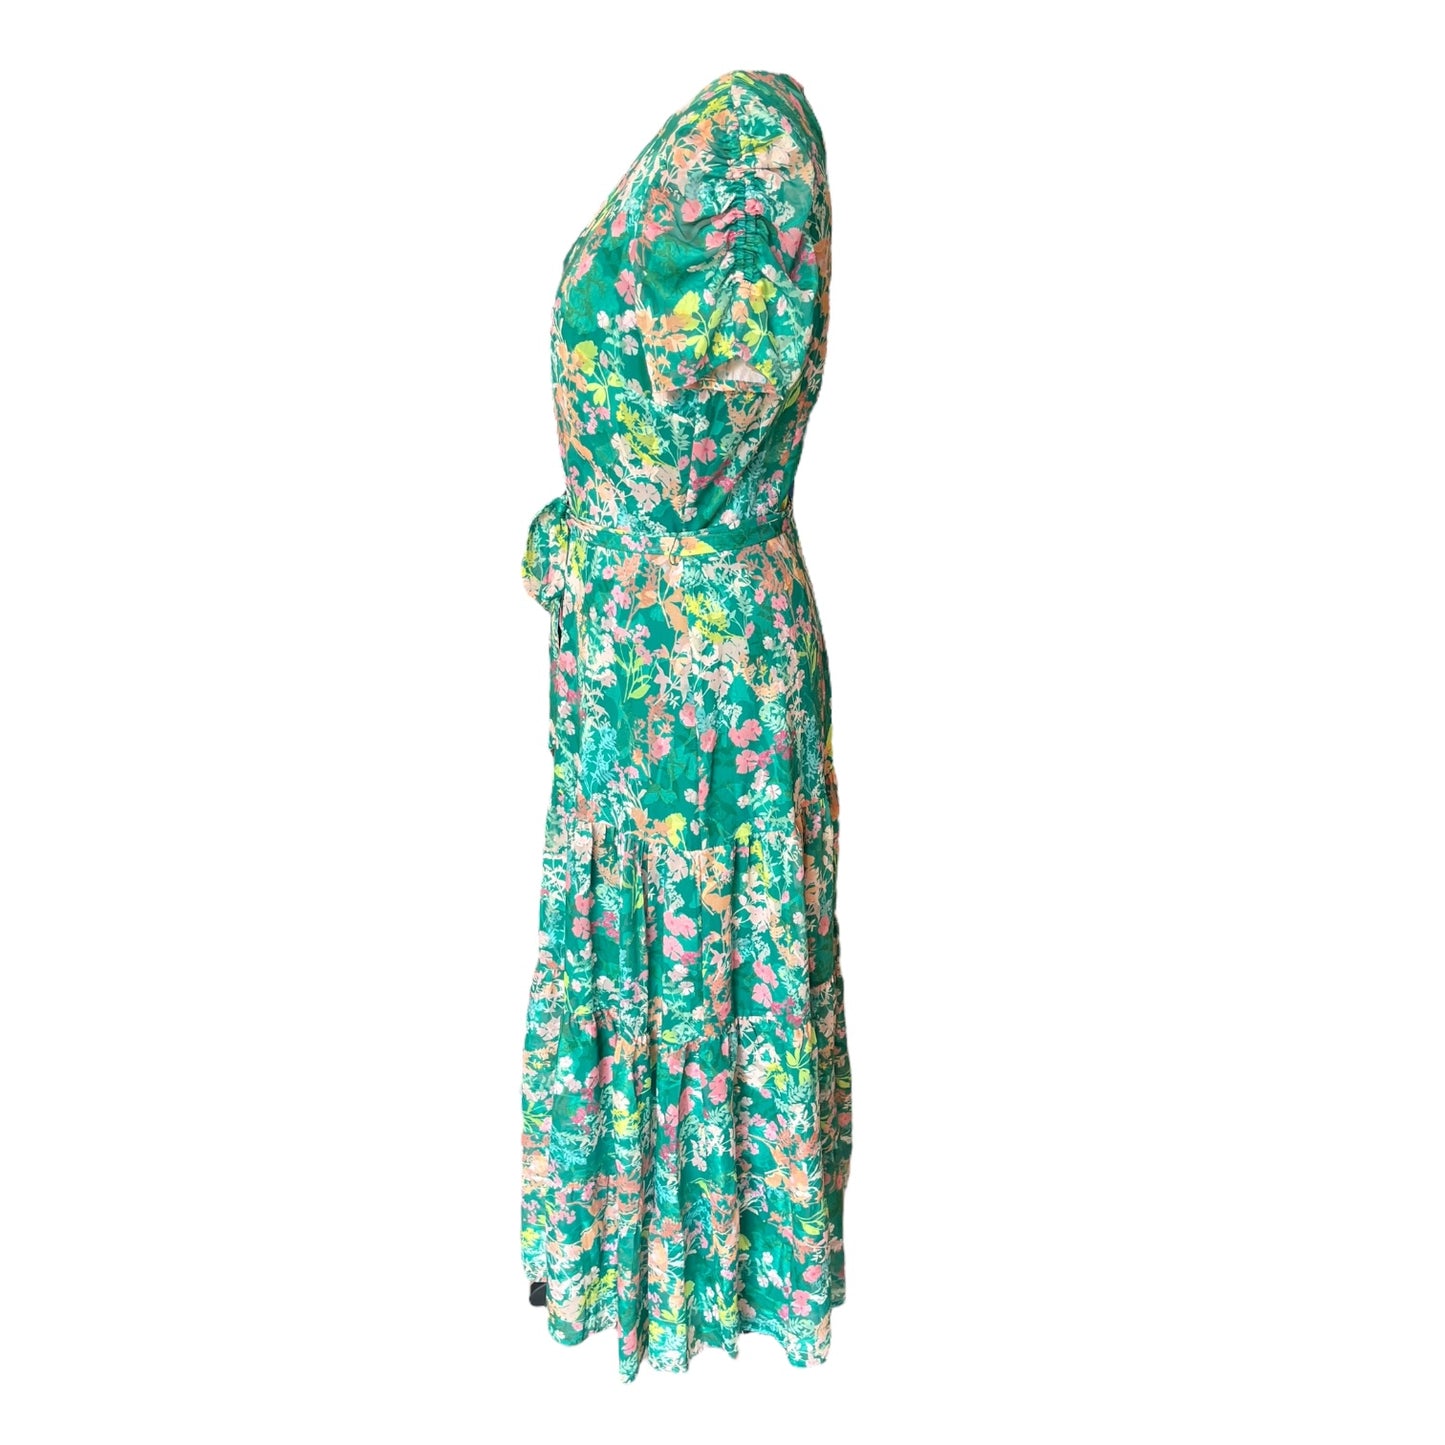 Phase Eight Green Floral Dress - 14